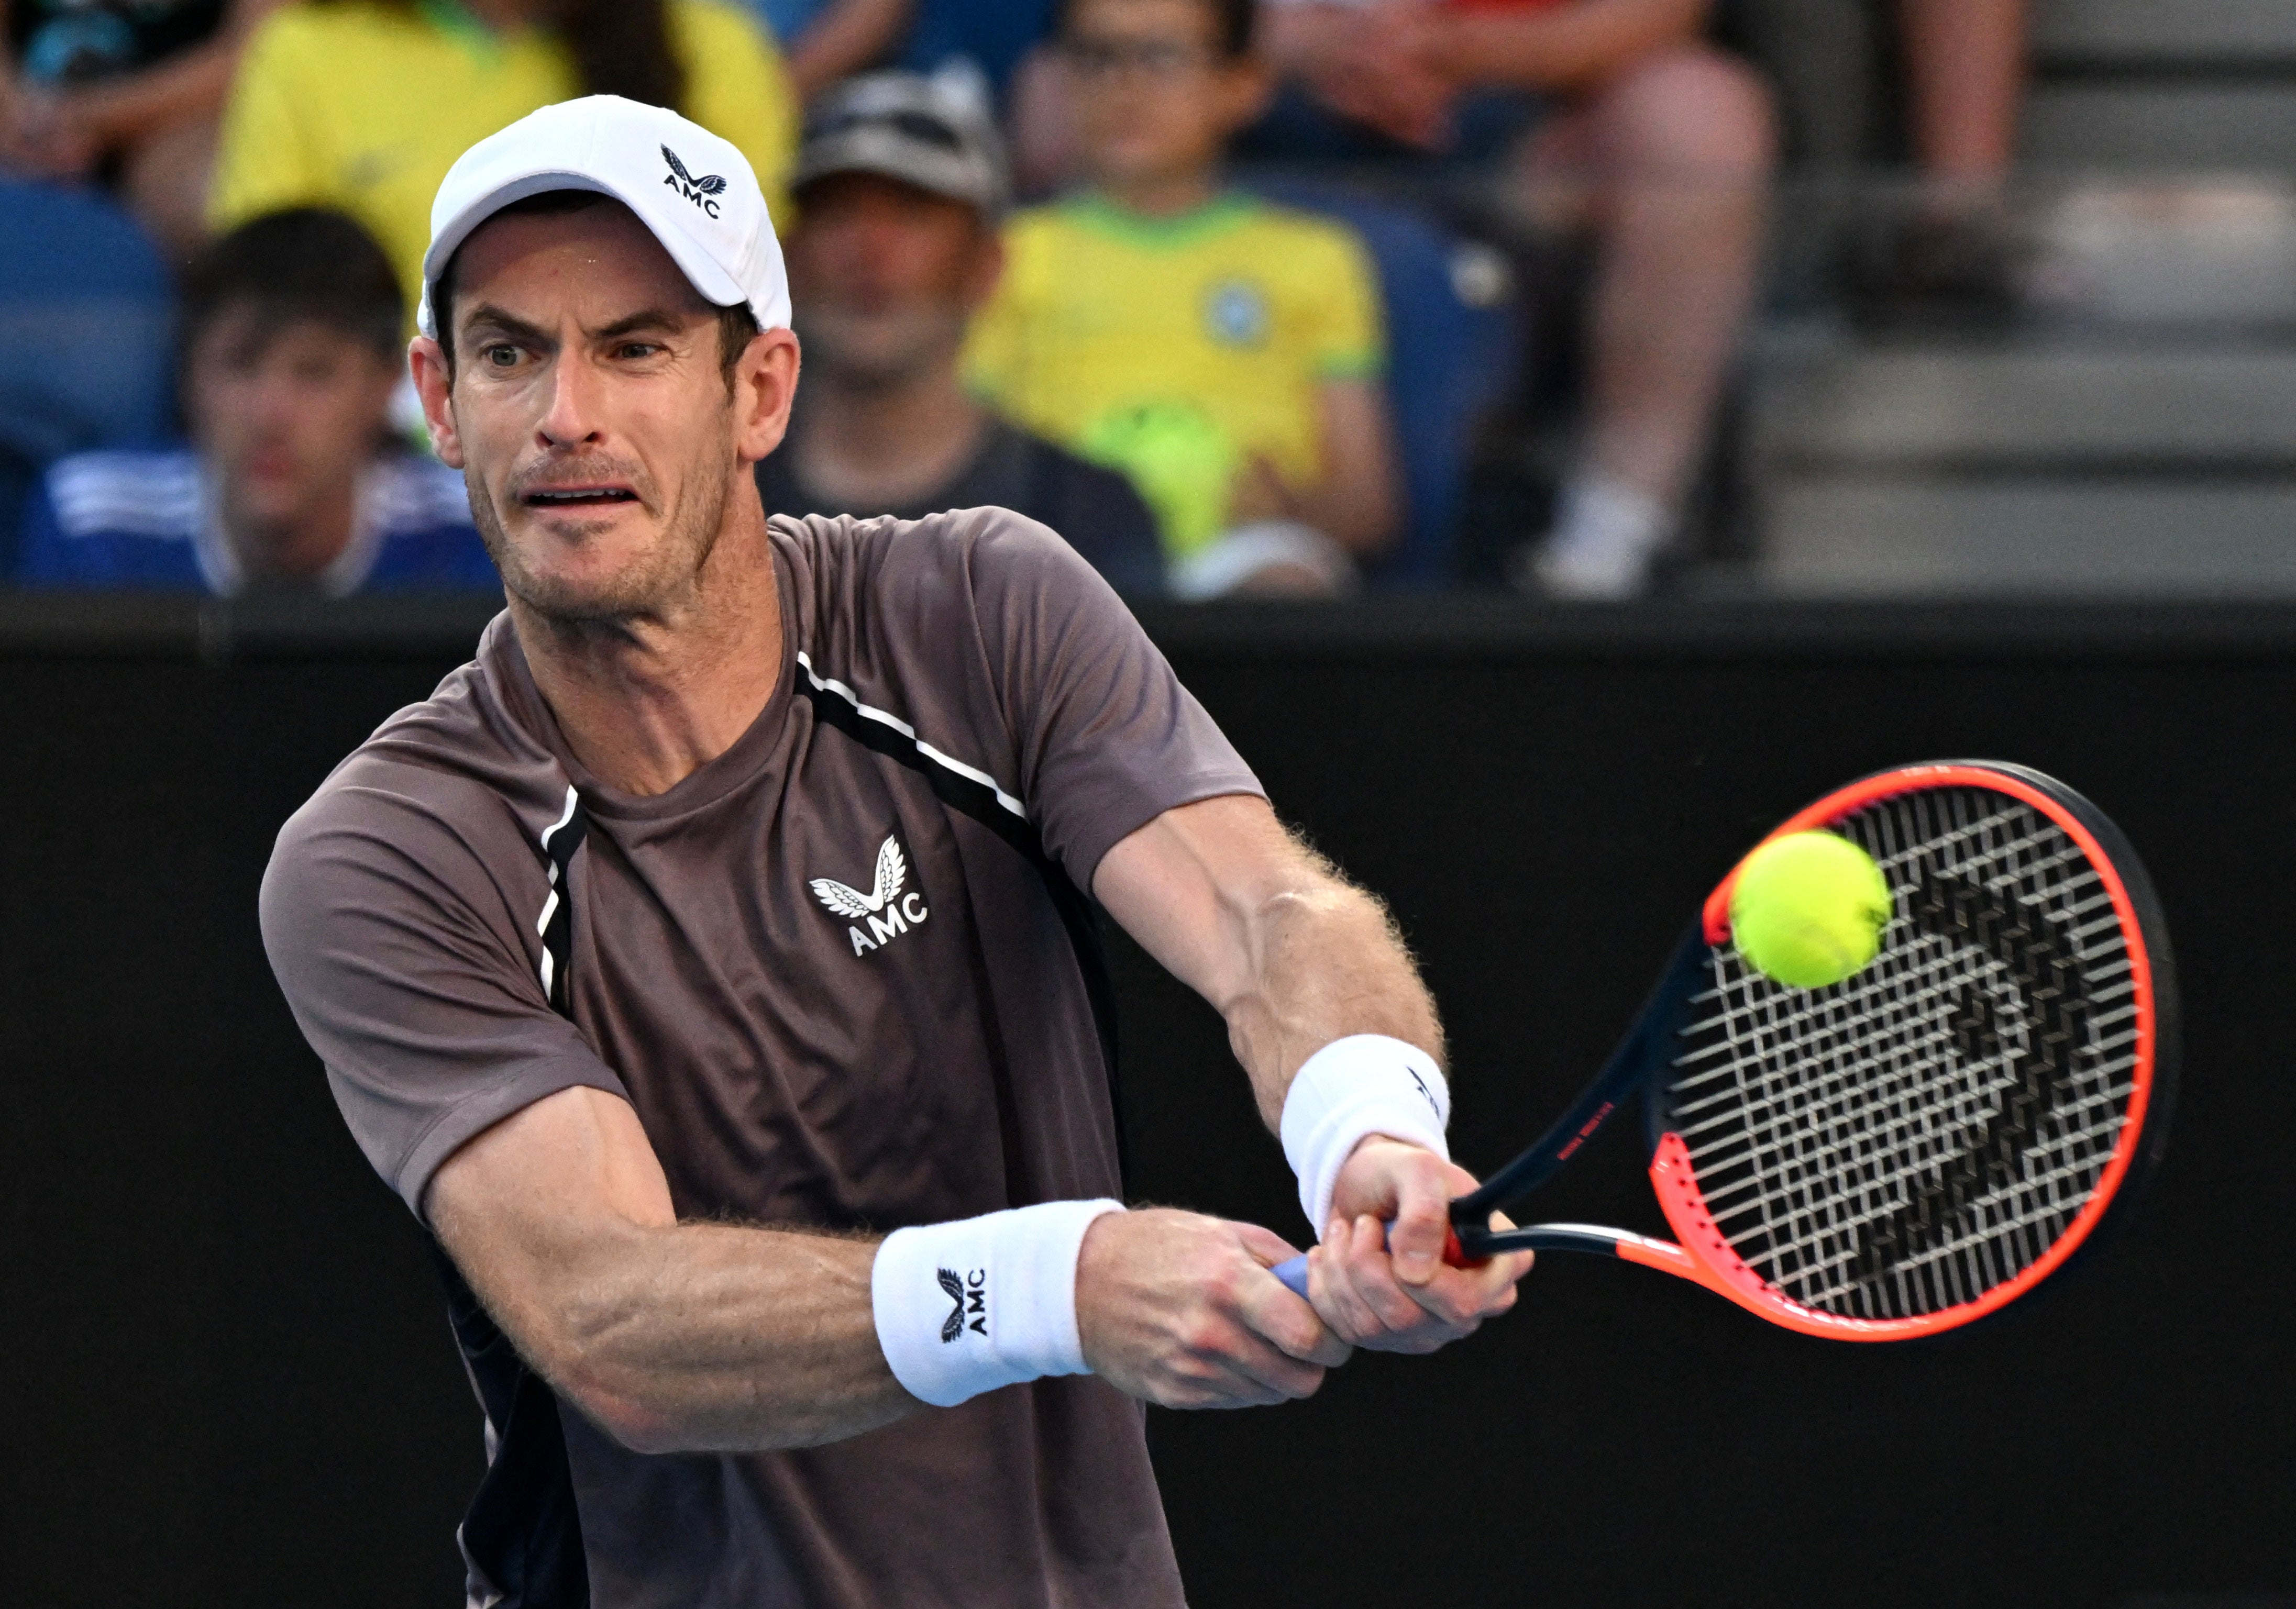 Andy Murray triumphed in the first round of the Qatar Open